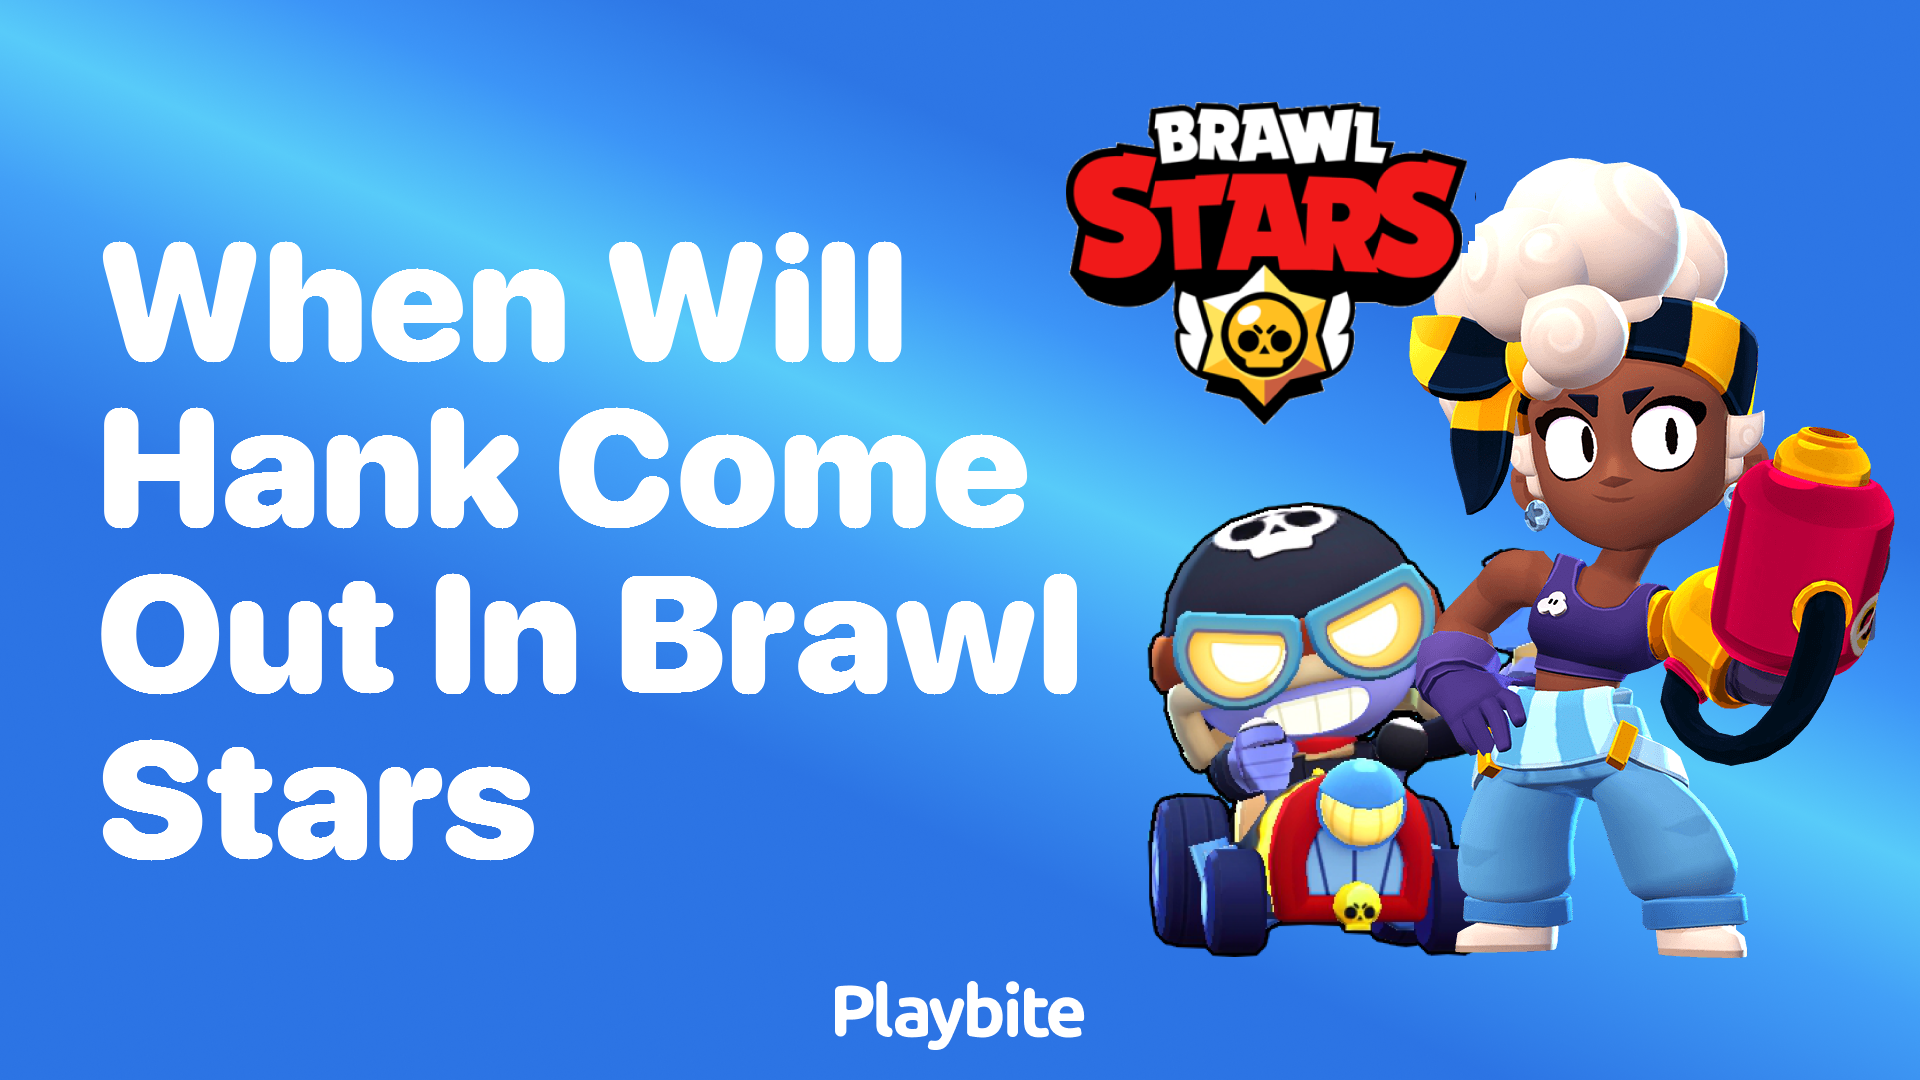 When Will Hank Come Out in Brawl Stars?